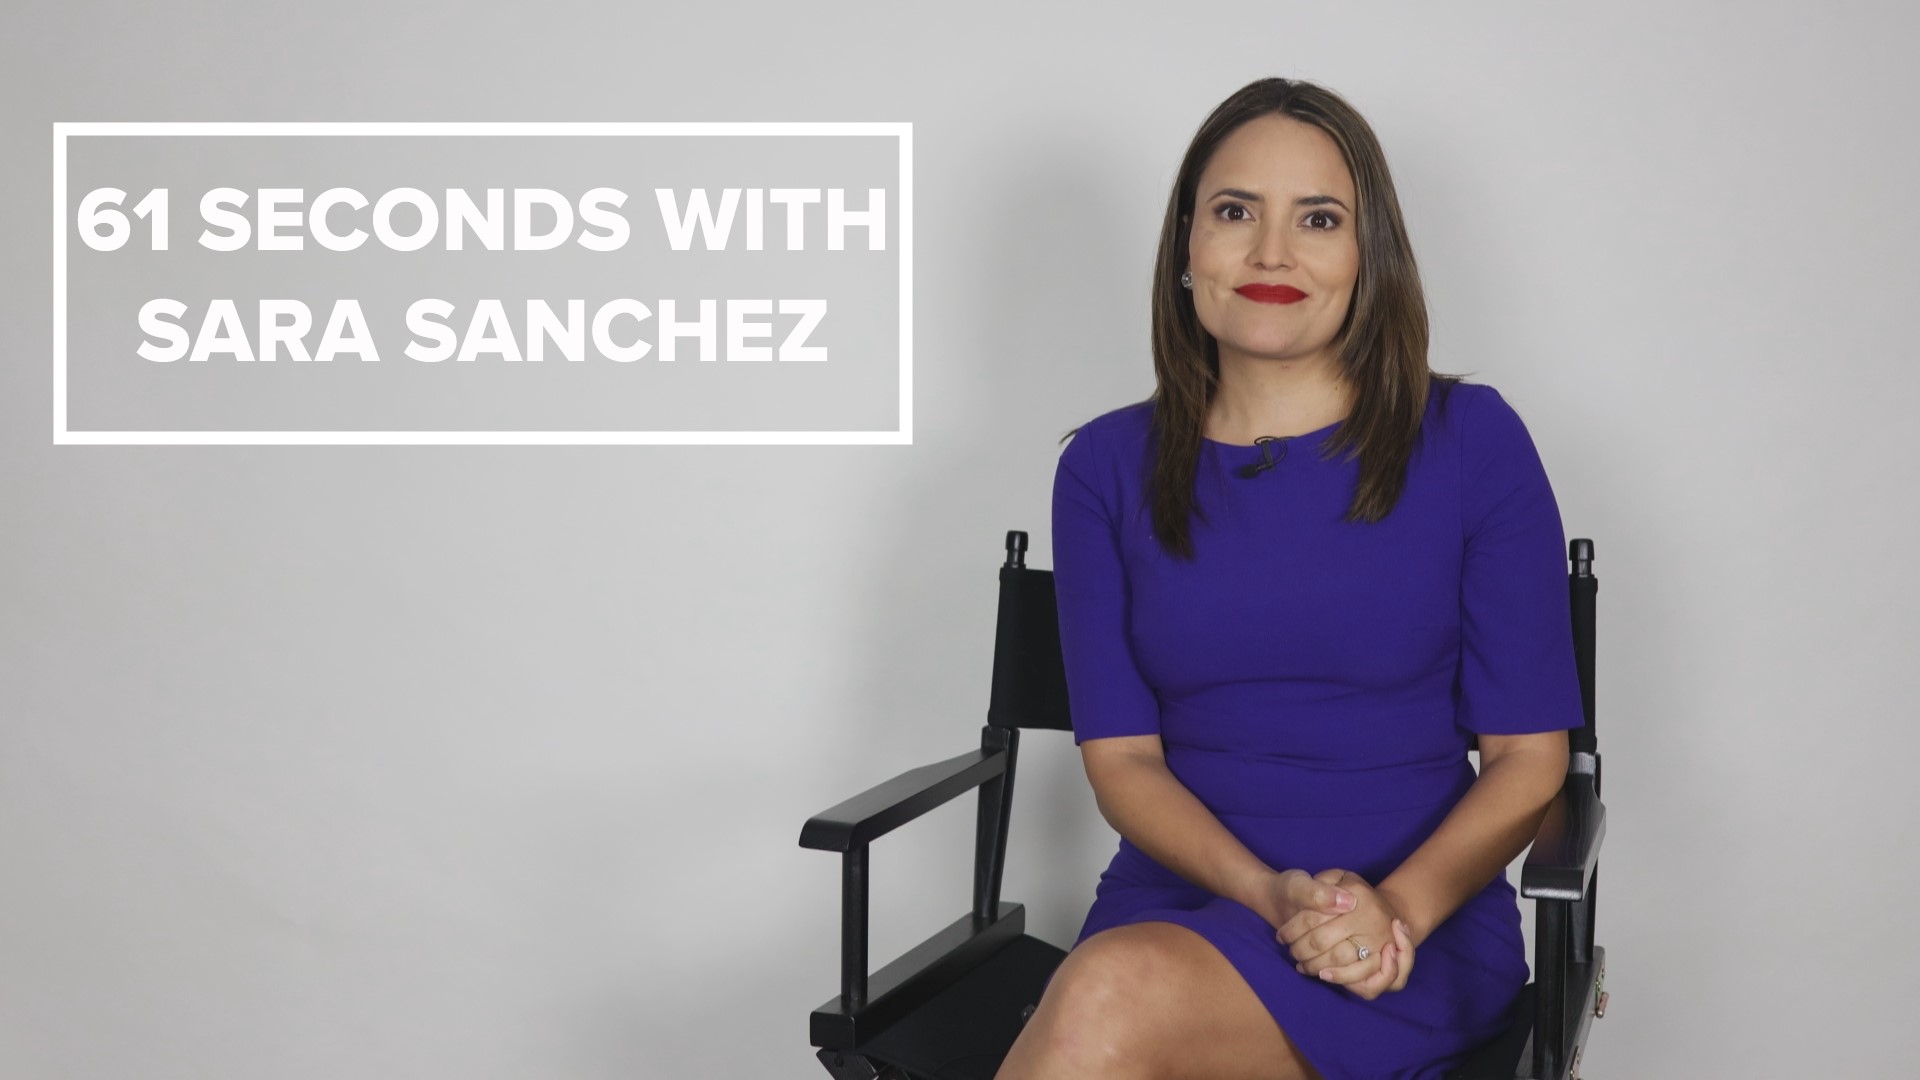 New FOX61 anchor Sara Sanchez answers some of the most burning questions in just 61 seconds.